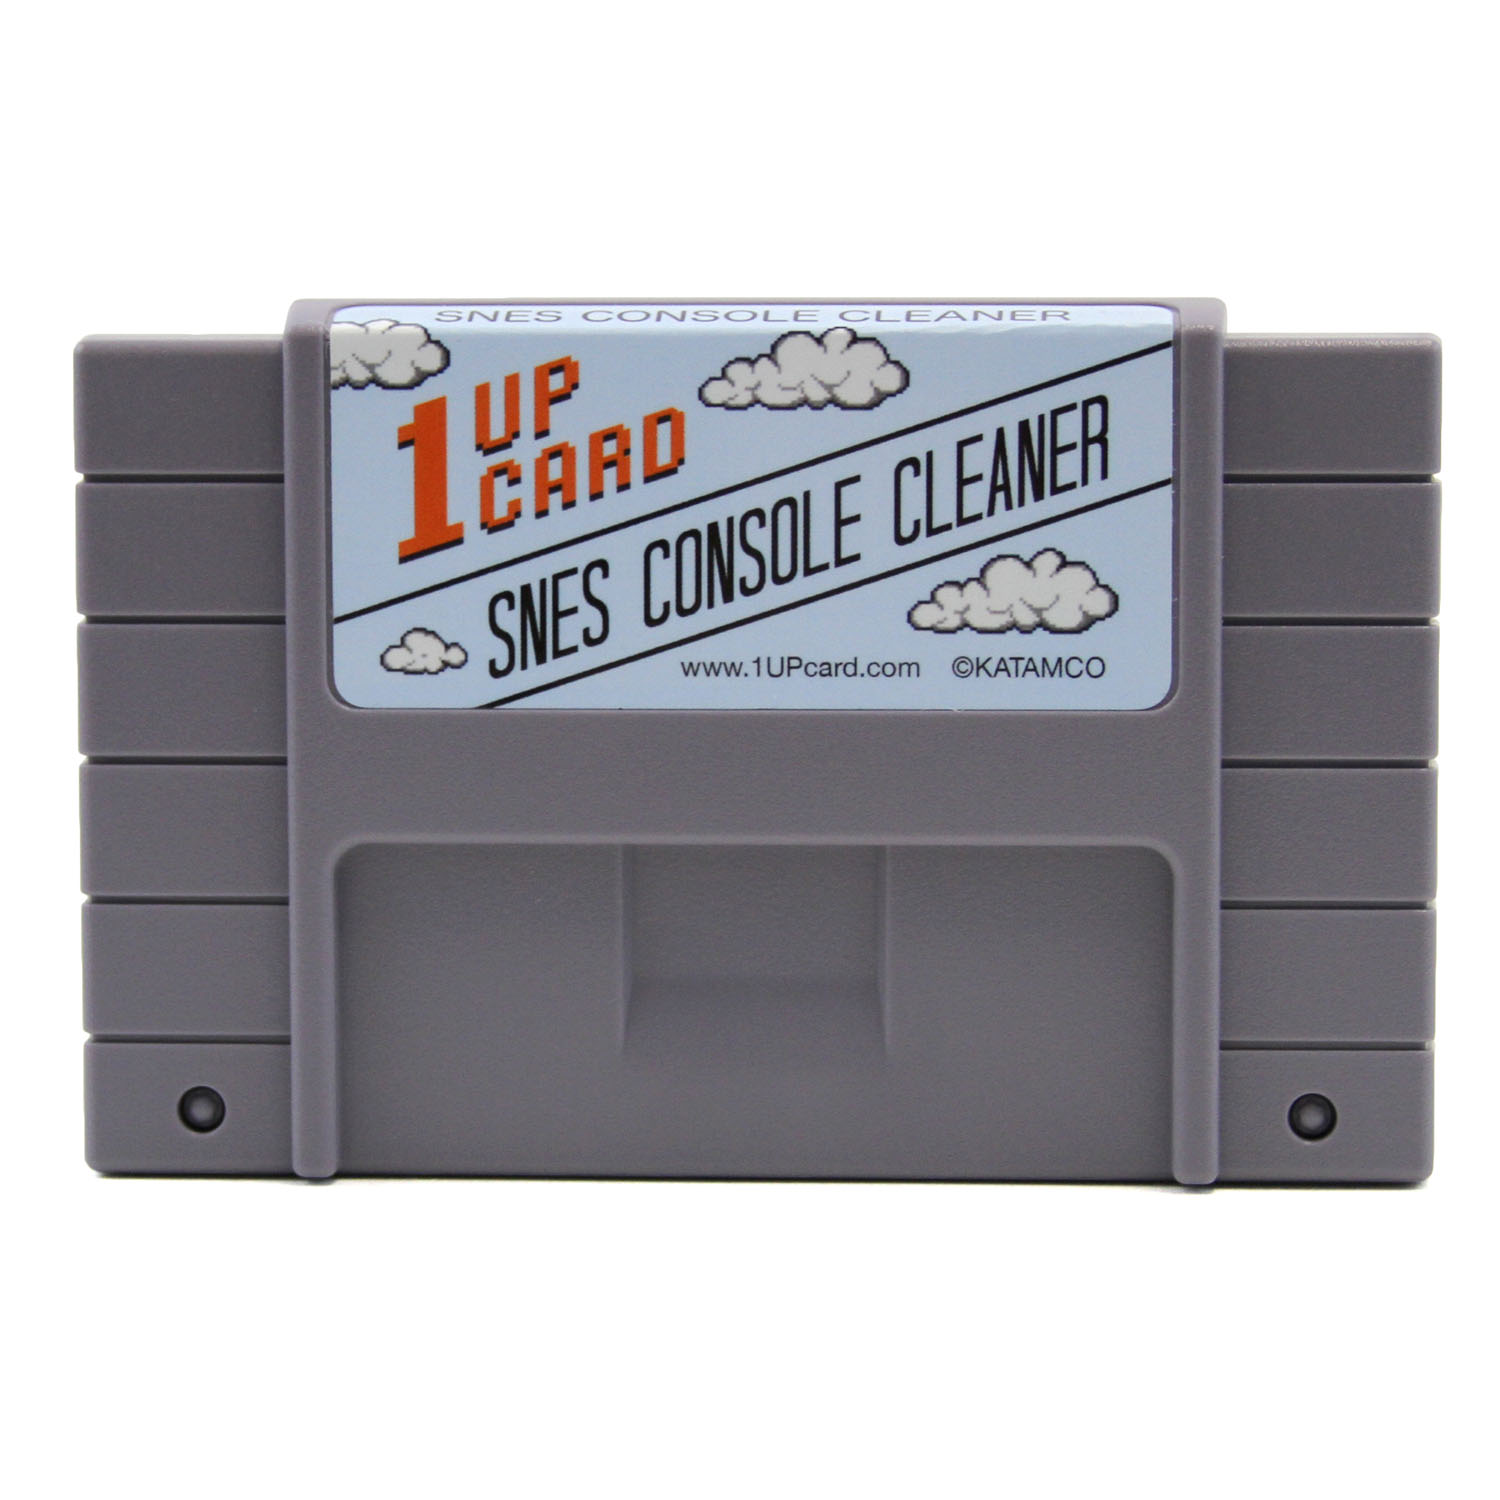 console cleaner